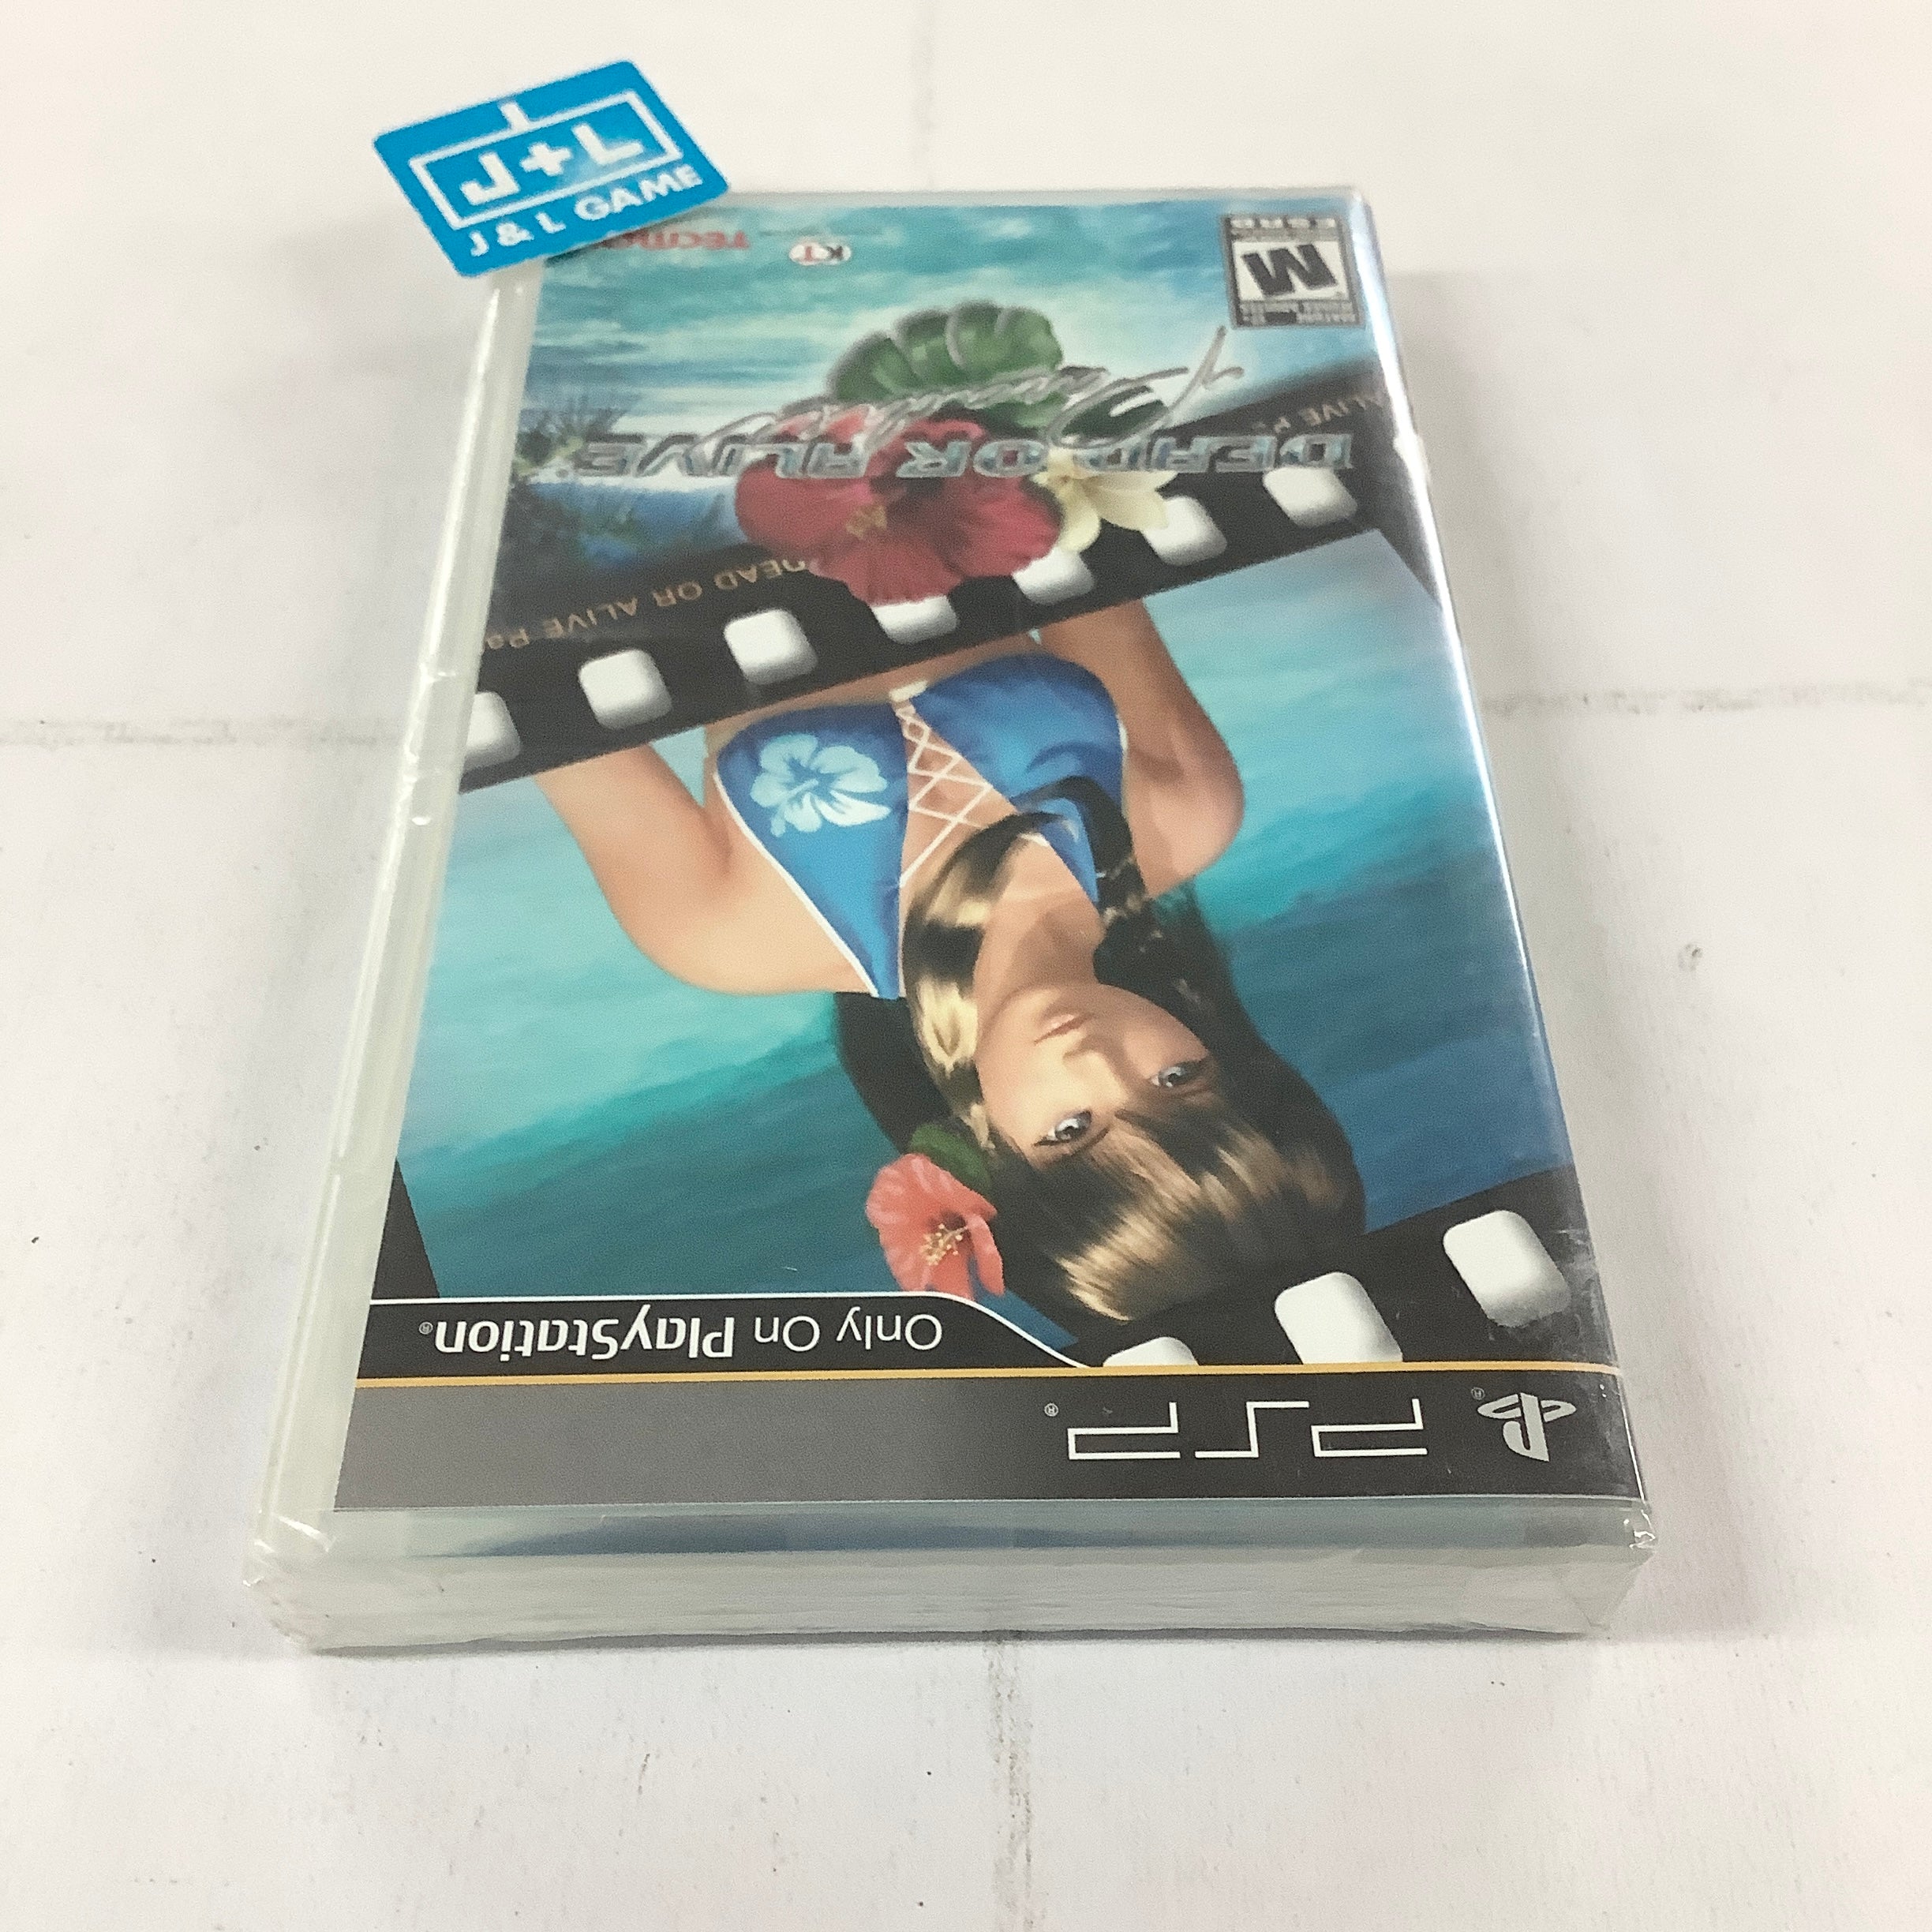 Dead or Alive Paradise - Sony PSP Video Games Tecmo   